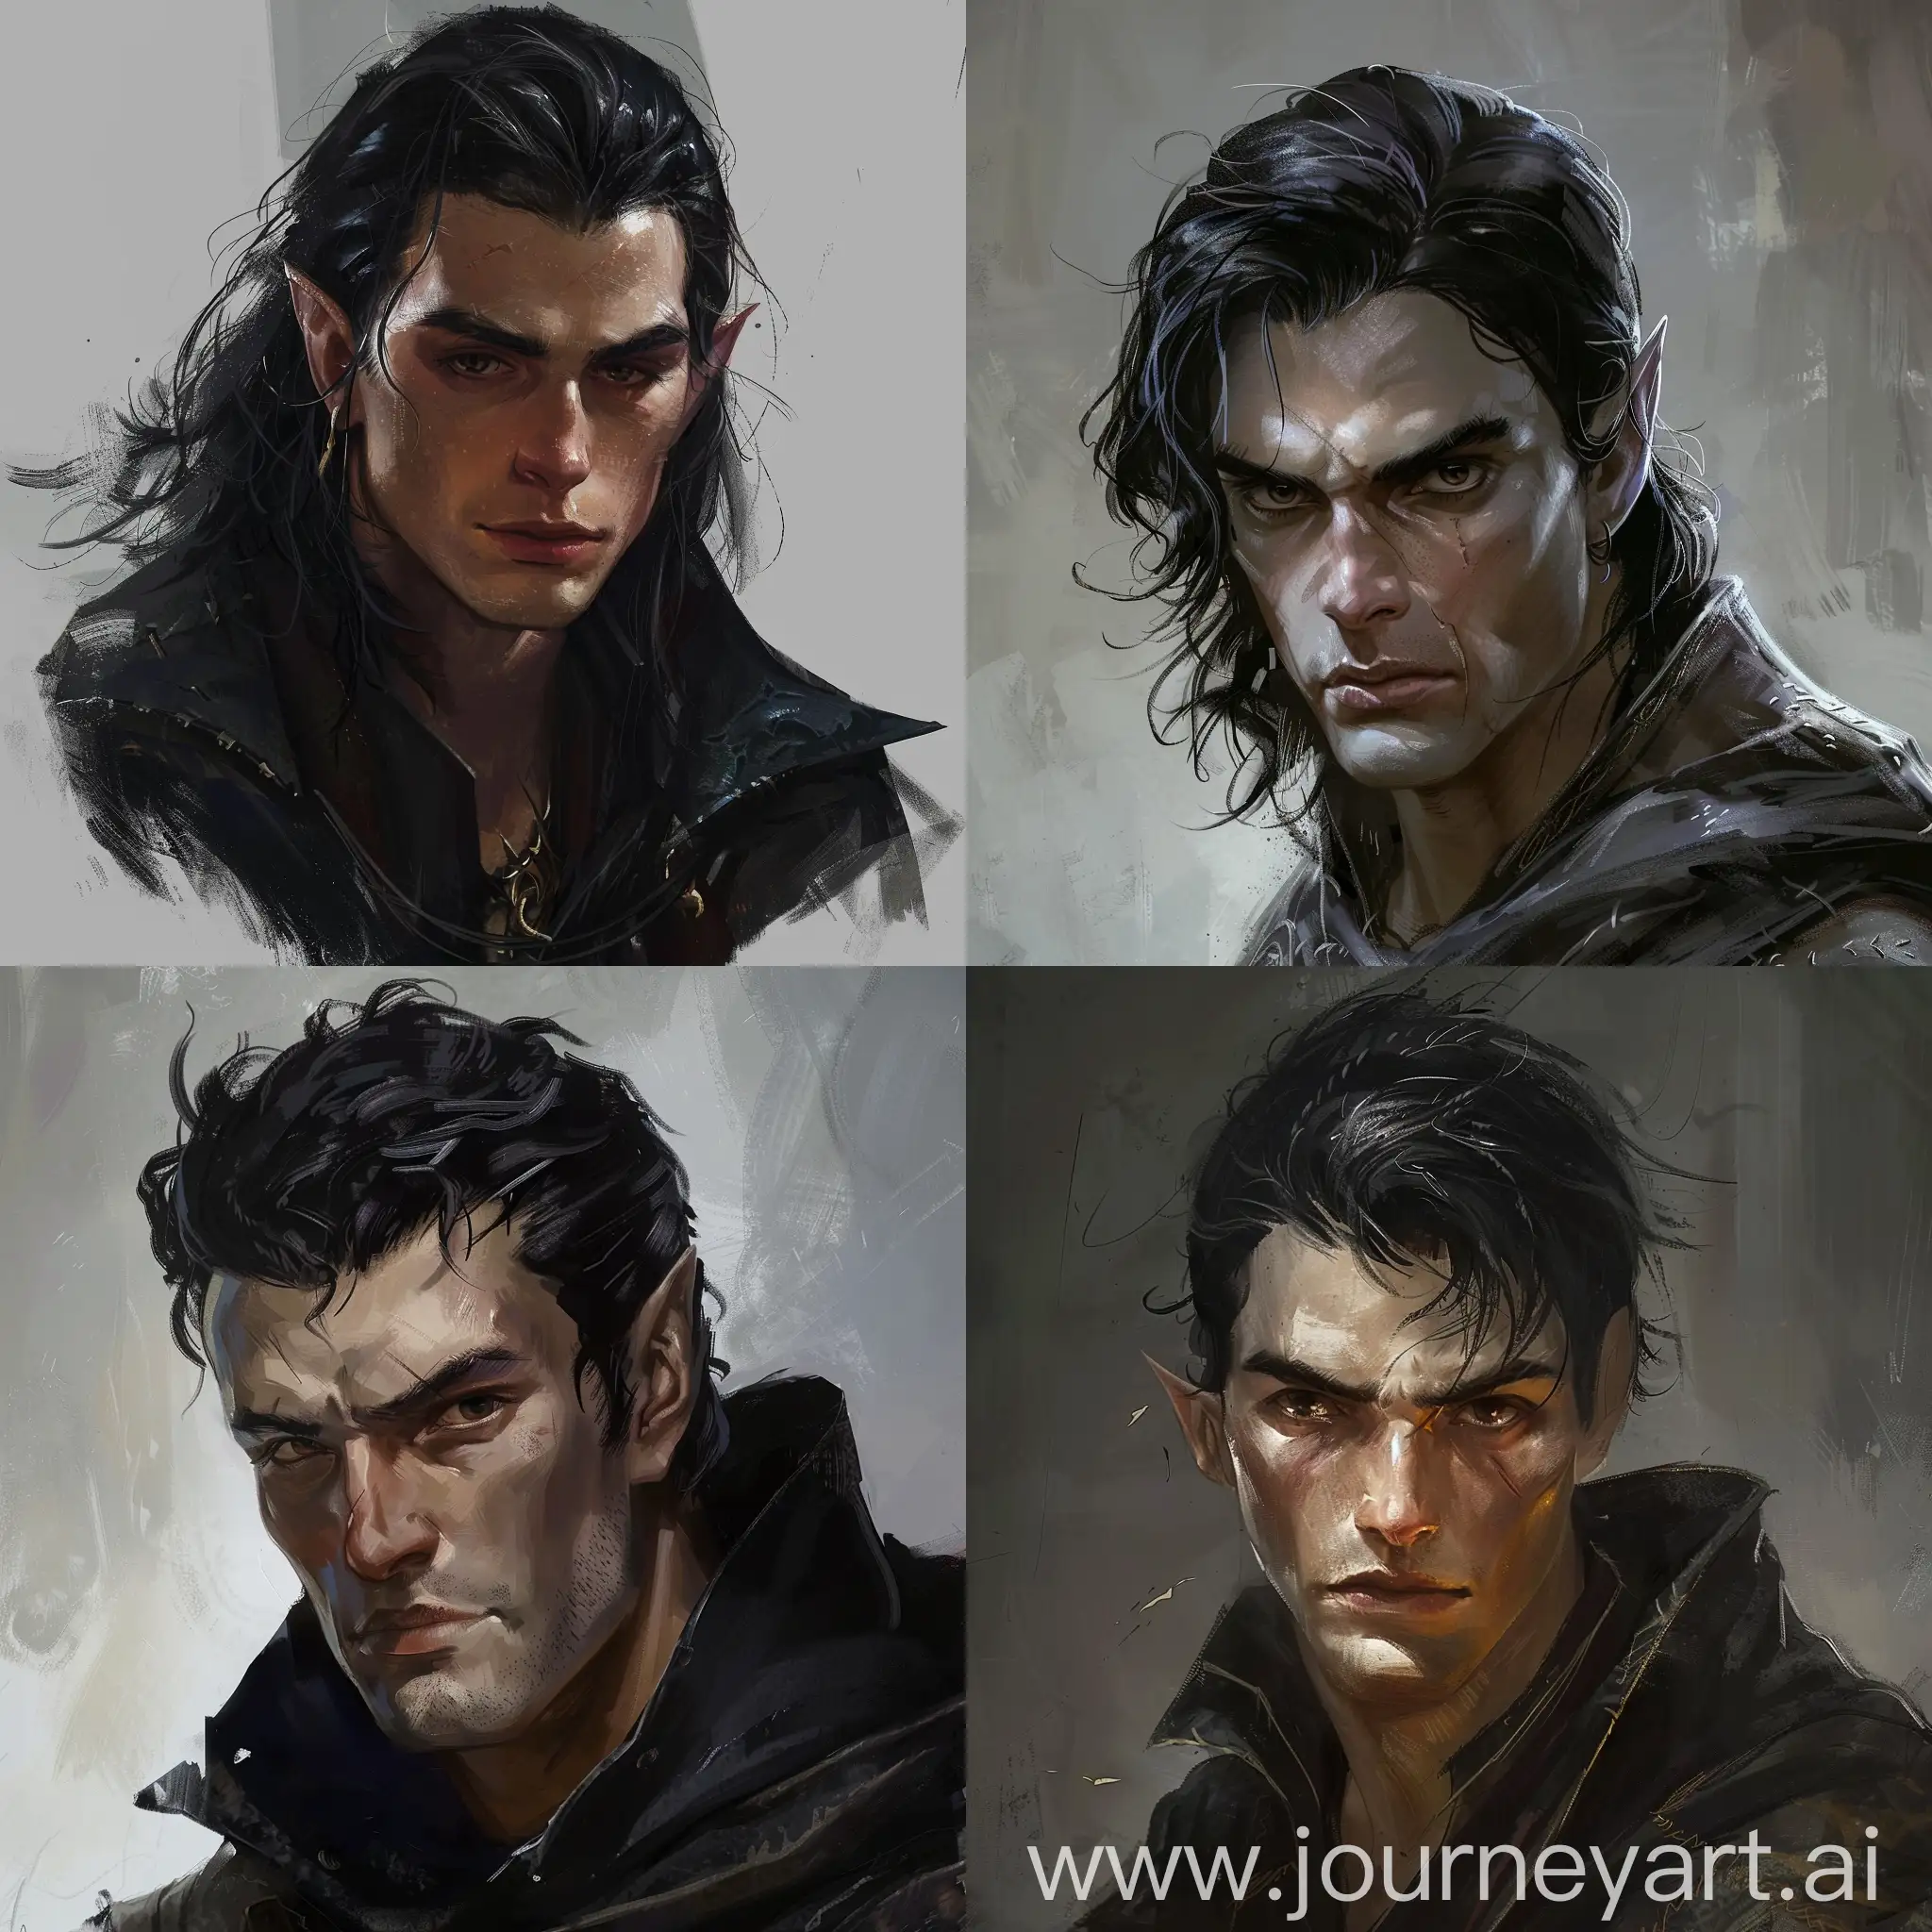 DND Rogue,male human,has a sharp jawline.Black haired.Staring.